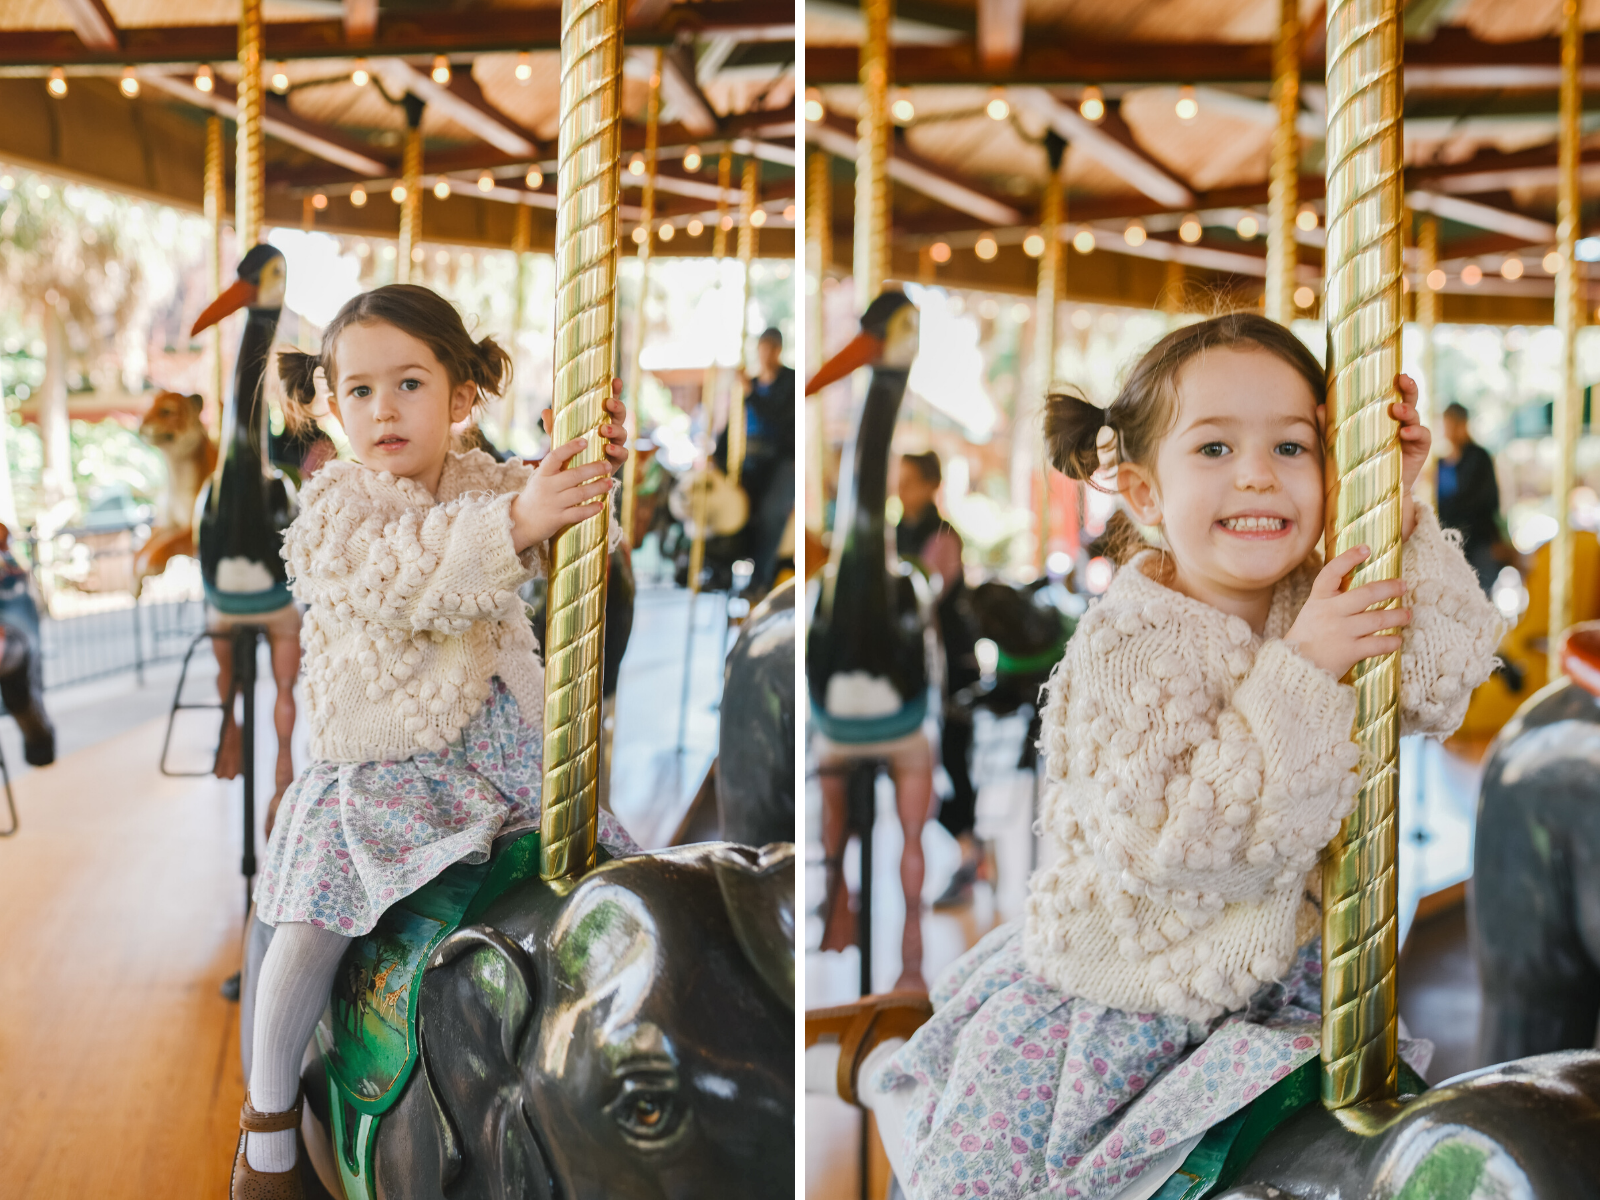 Things to do in Columbia SC by popular Memphis travel blog, Lone Star Looking Glass: image of a little girl riding a carousel at the Riverbanks zoo. 